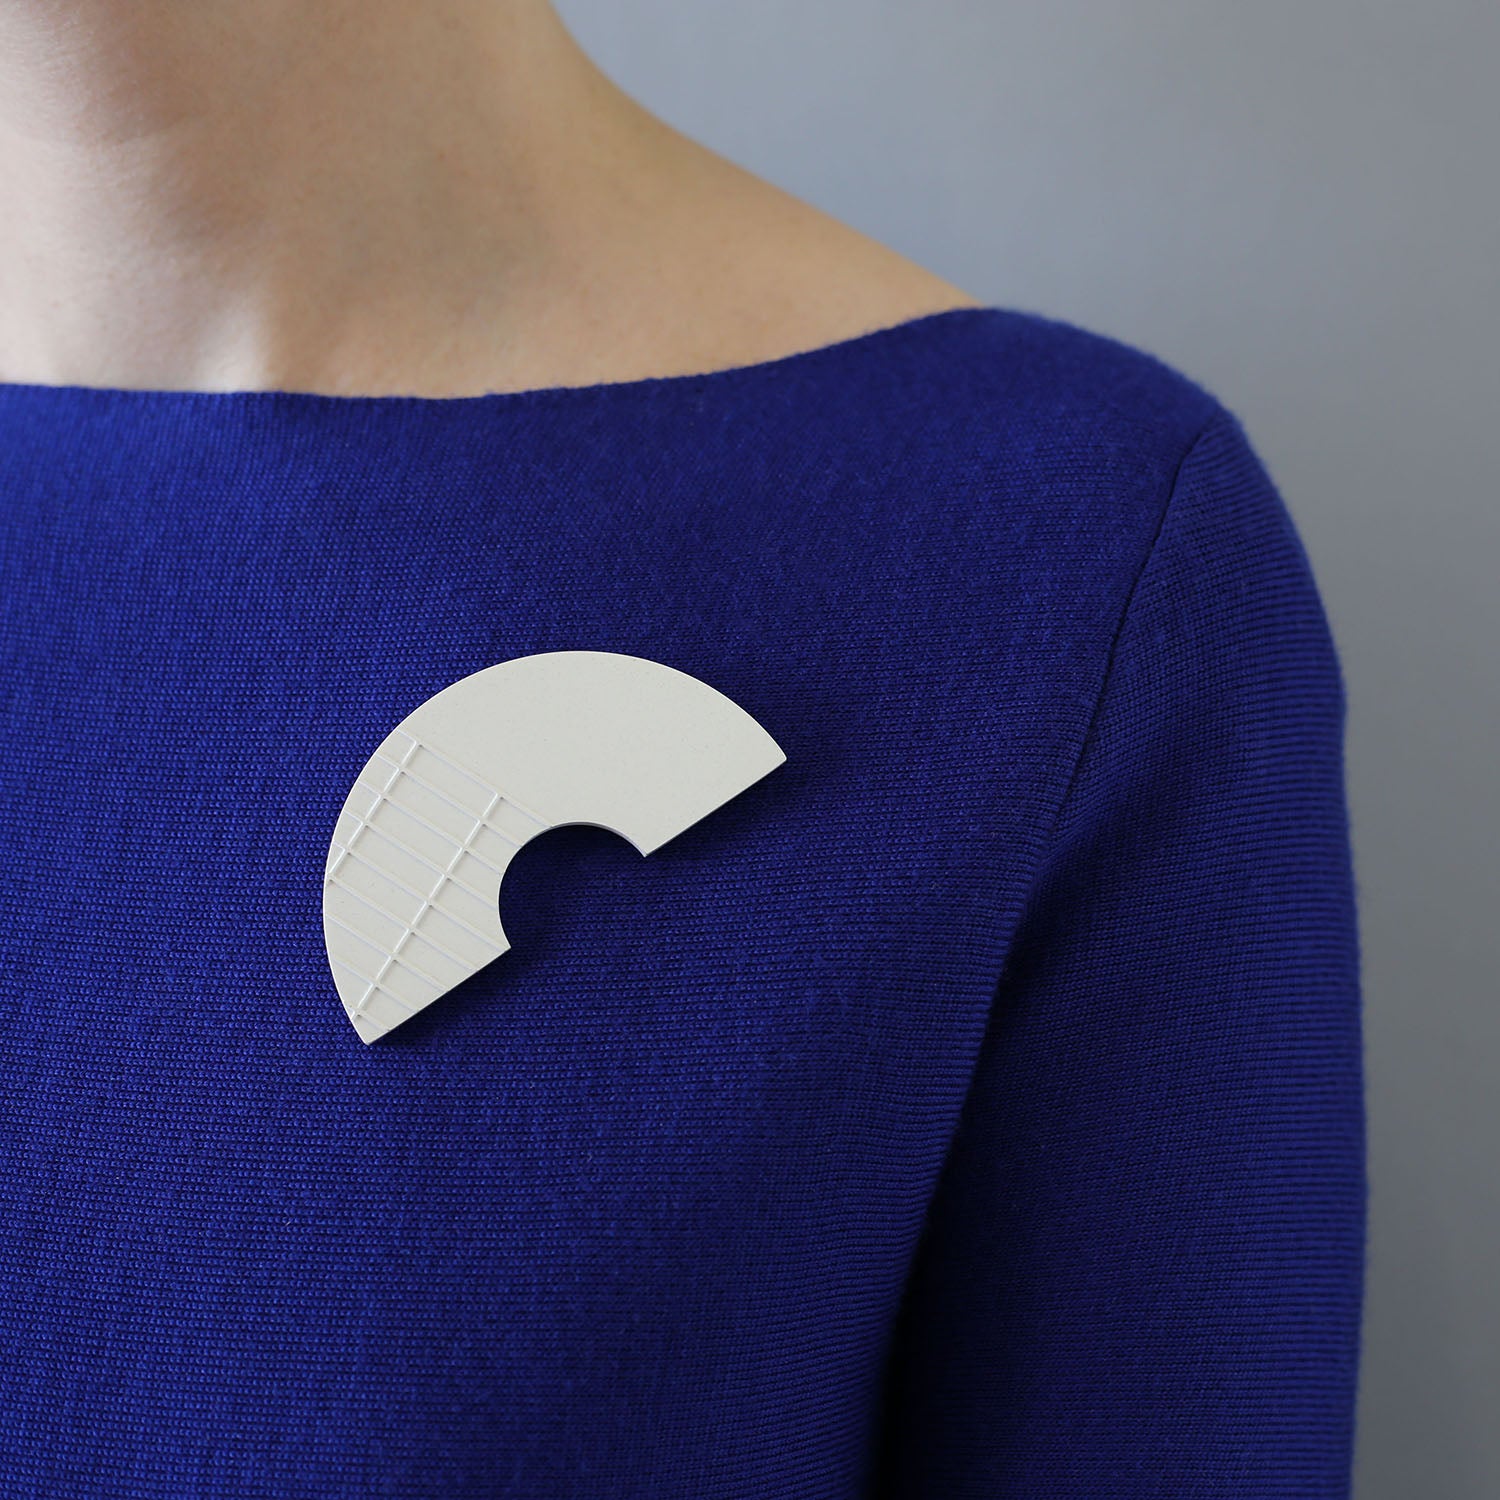 Model wearing handcast brooch inspired by the brutalist architecture of London's Barbican centre. Gil has a raised grid pattern on part of the surface. Each brooch is cast by hand in our south London studio and comes in branded gift box. (8cm x 4cm)